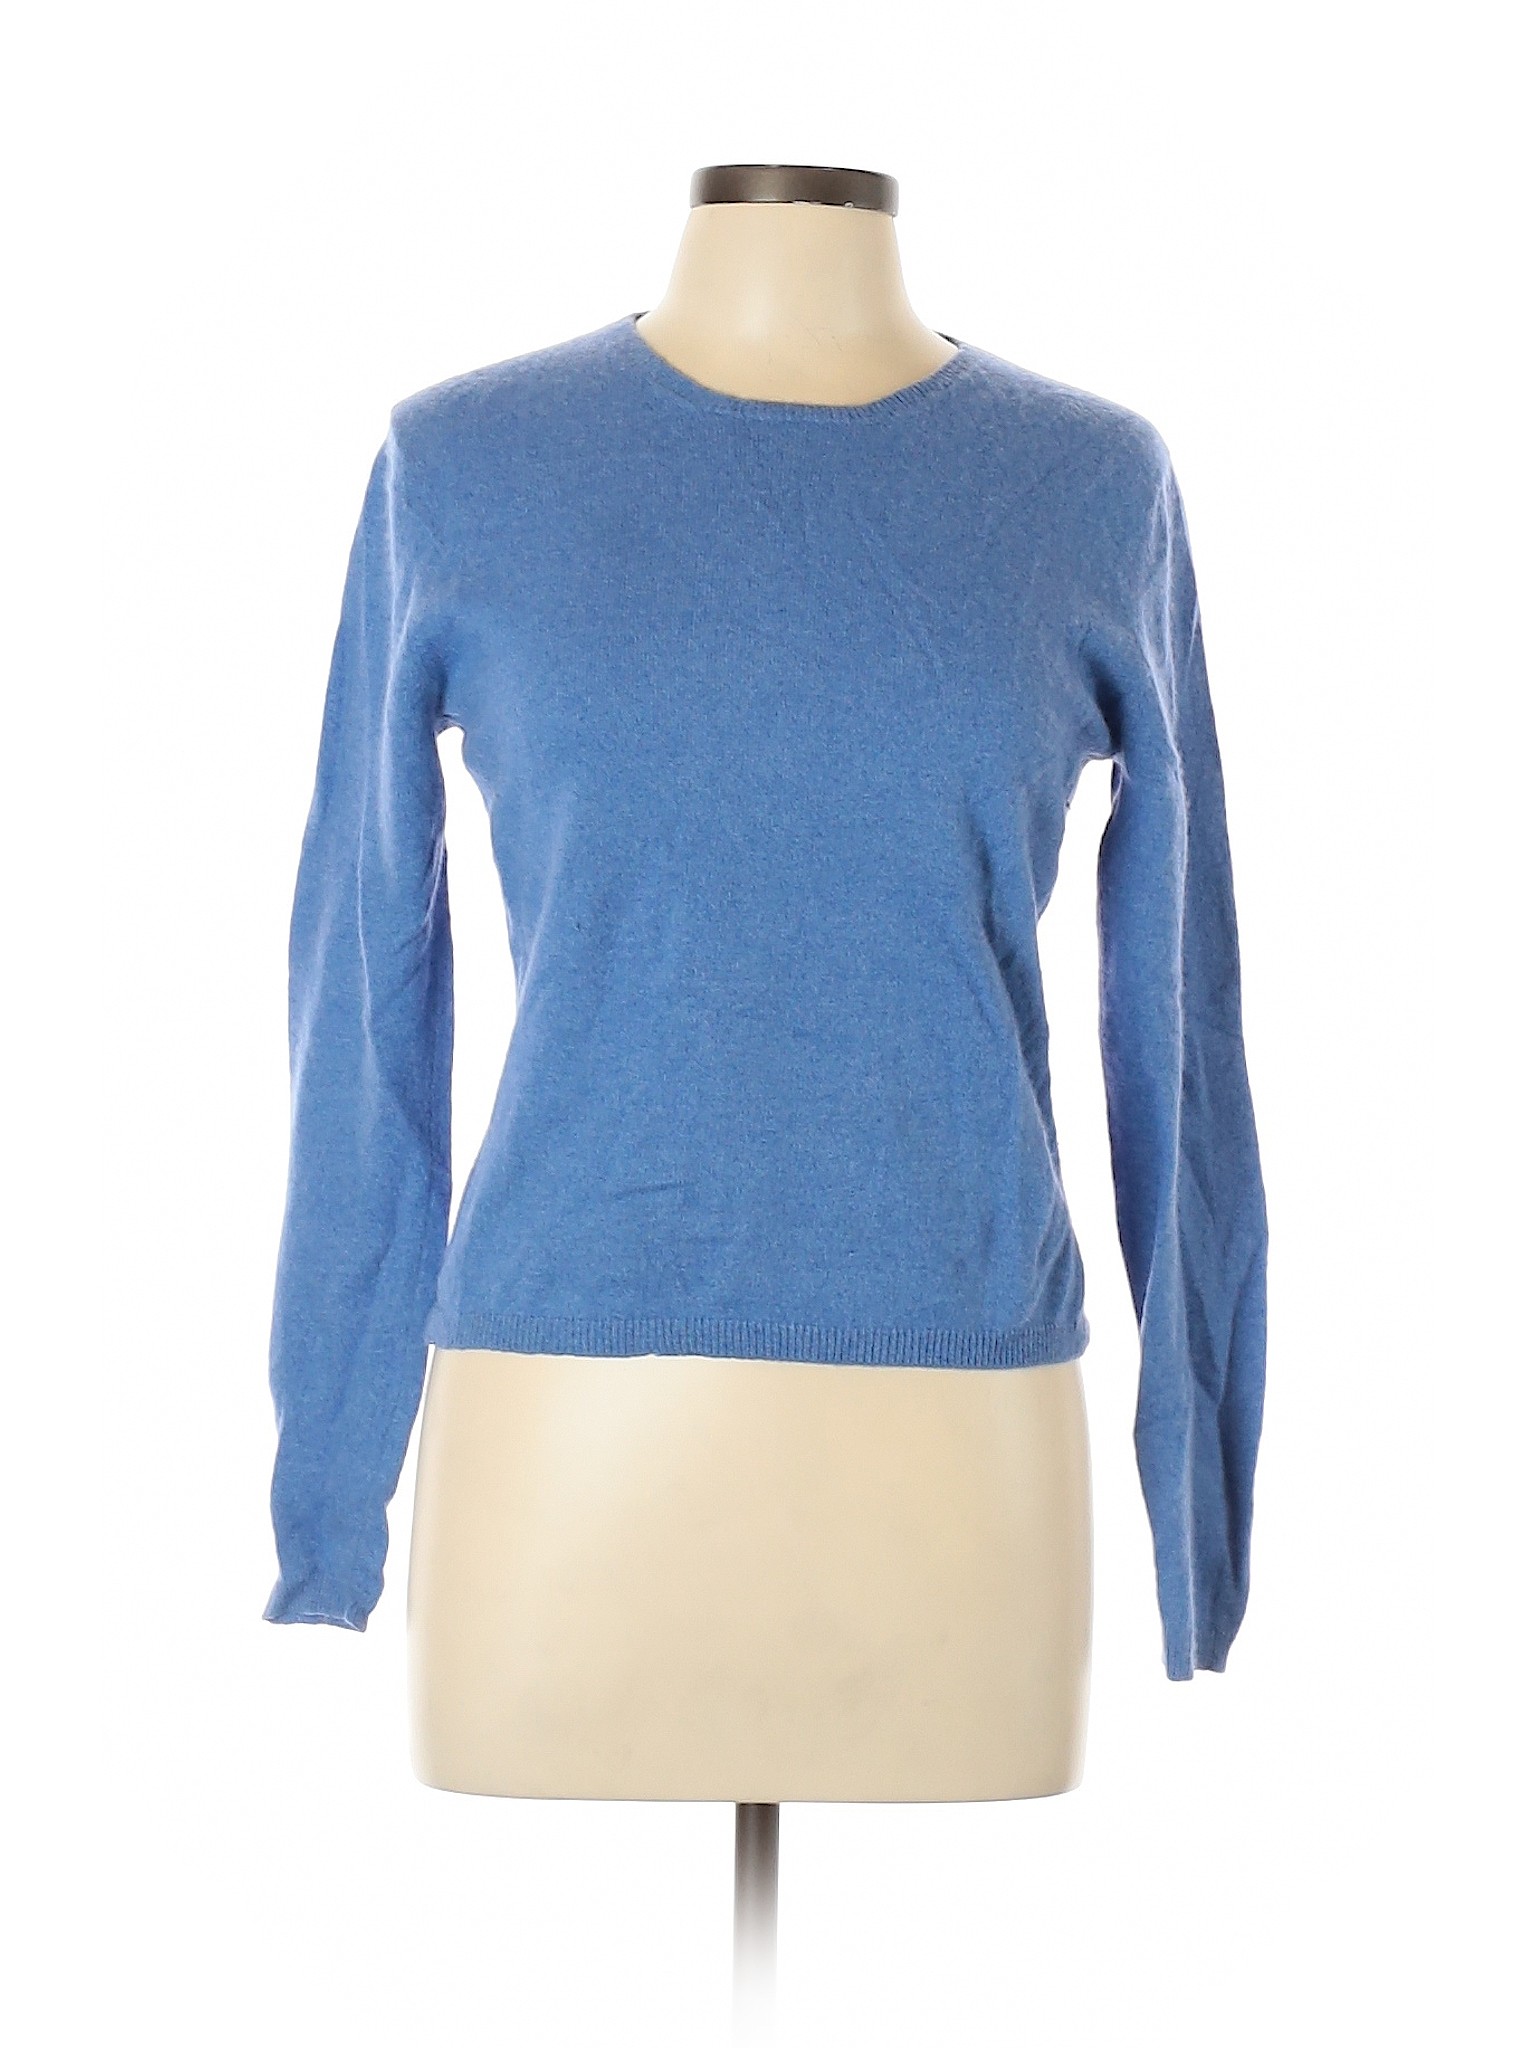 J. McLaughlin Blue Cashmere Pullover Sweater Size L (Youth) - 94% off ...